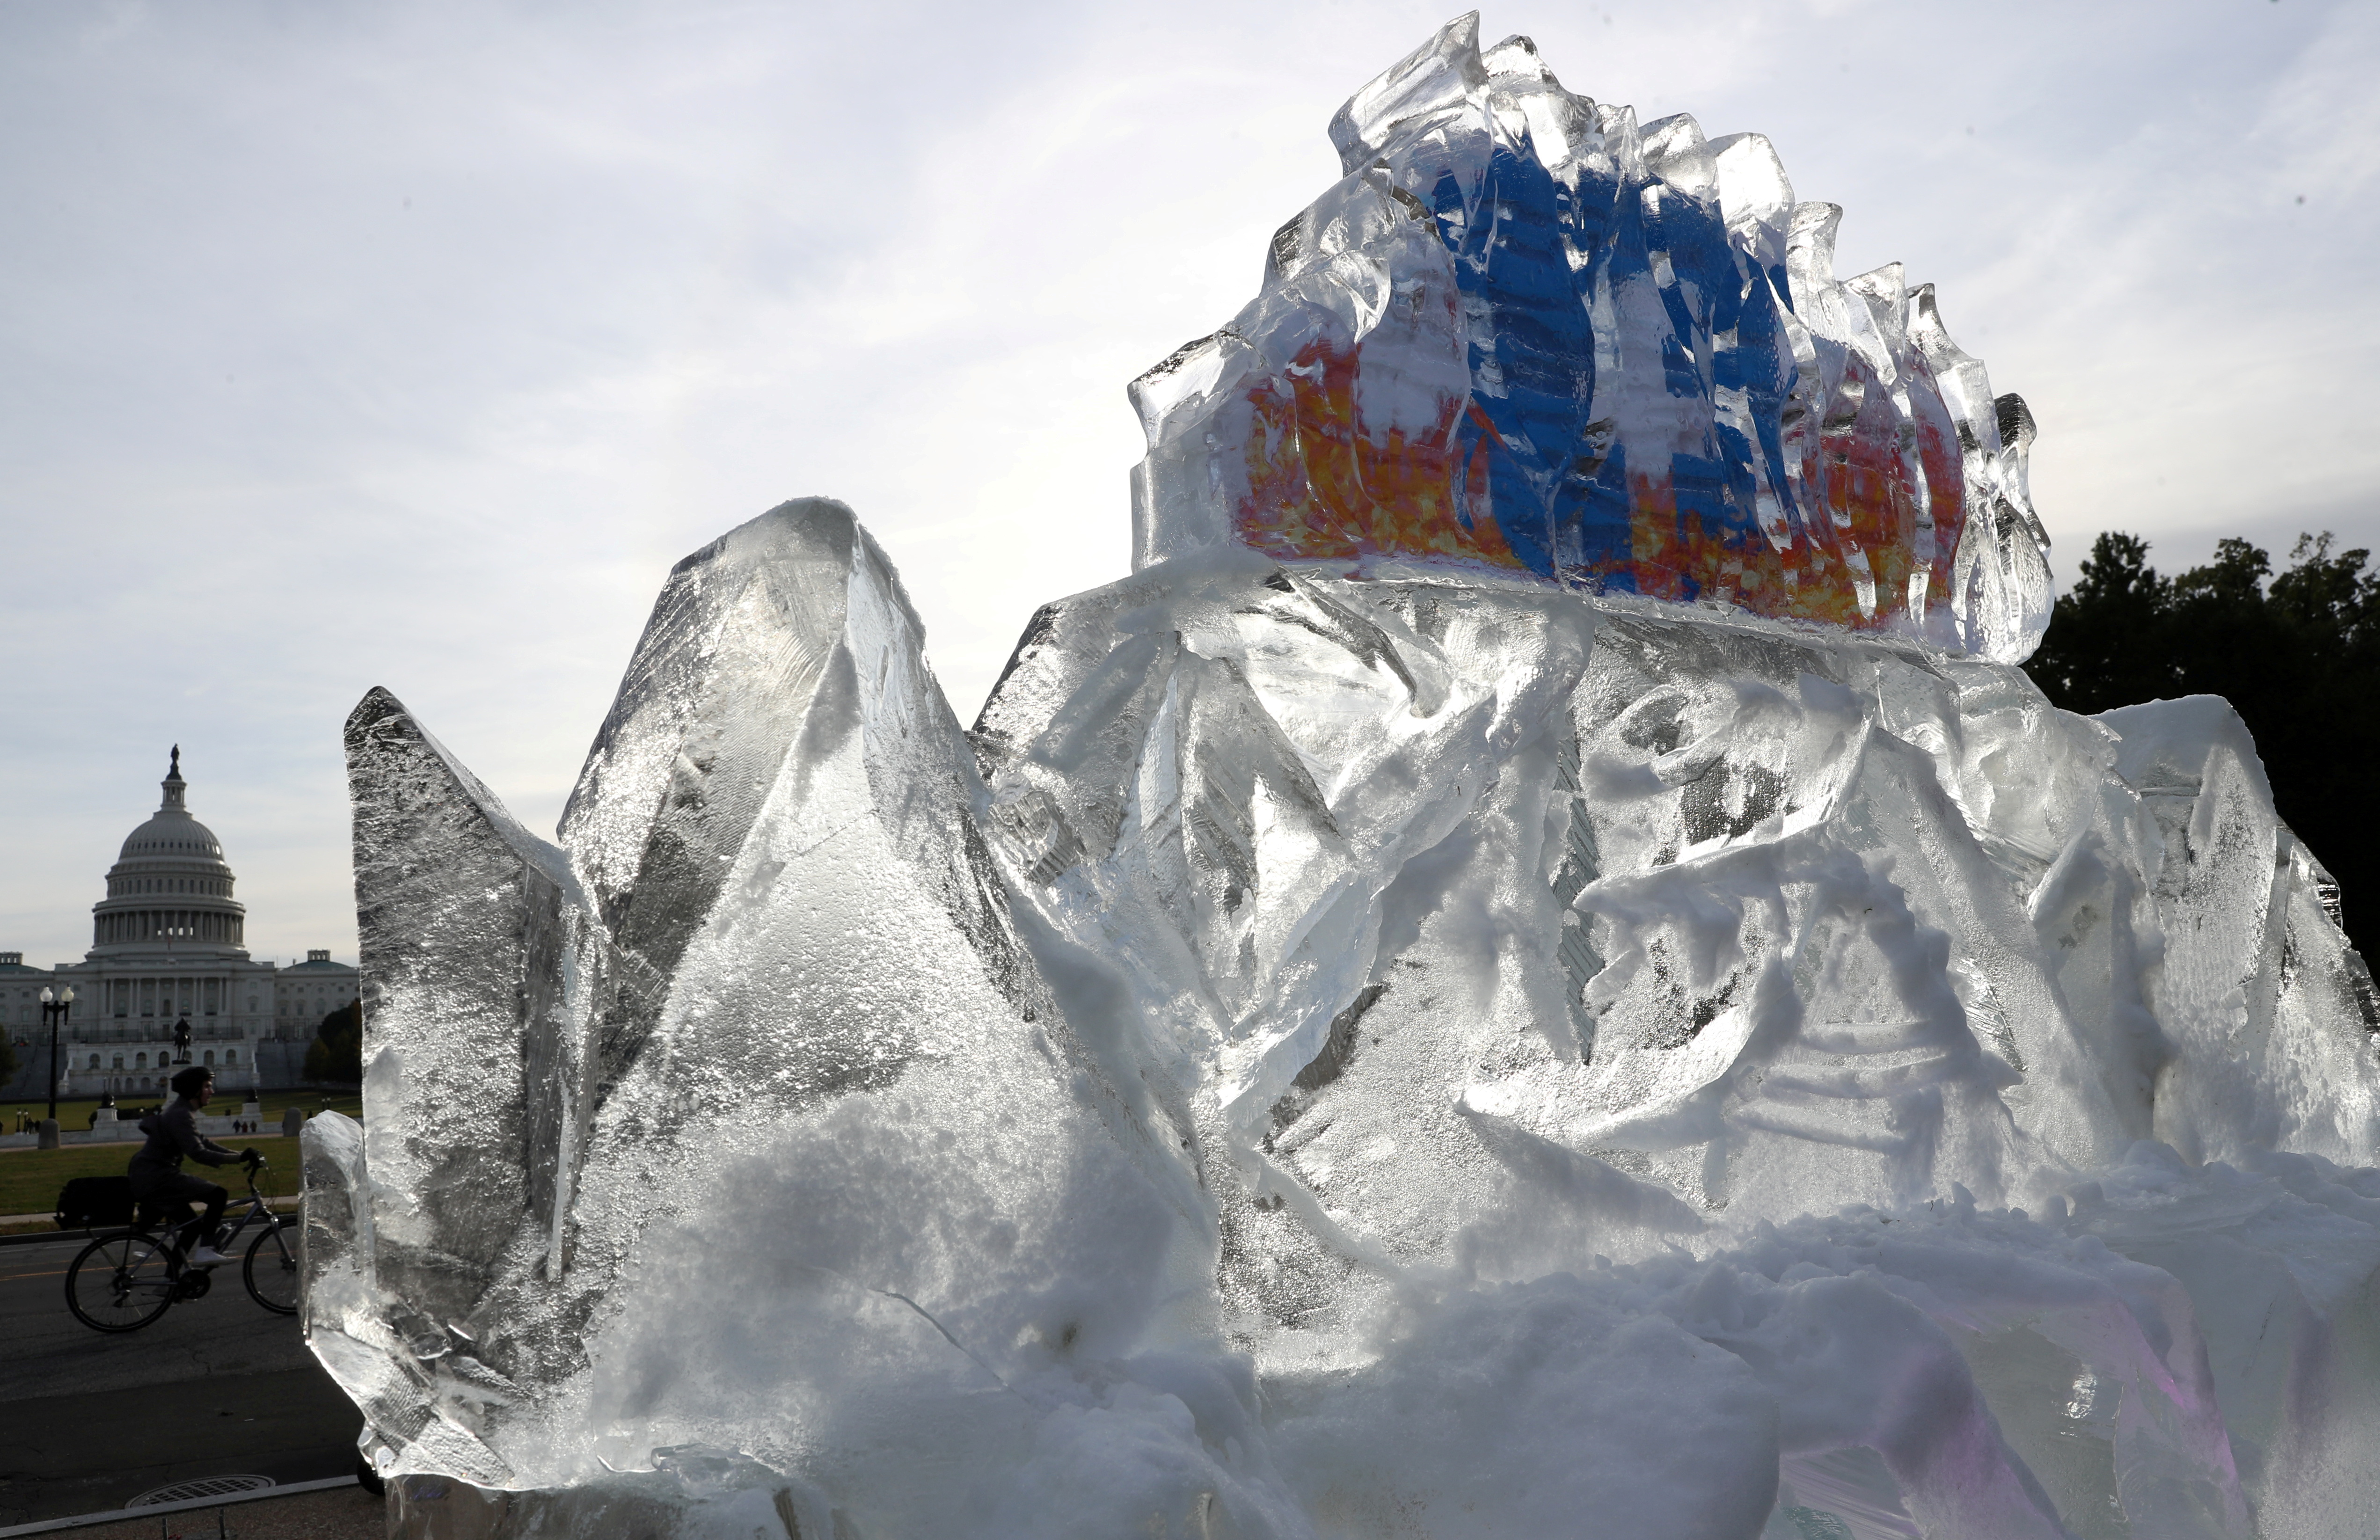 A 5,000 pound ice sculpture with Facebook’s logo embedded on the inside, placed on the National Mall by climate activists, melts near the U.S. Capitol building to protest what they say is Facebook’s role in promoting climate misinformation online in Washington, U.S., November 4, 2021. REUTERS/Leah Millis/File Photo/File Photo